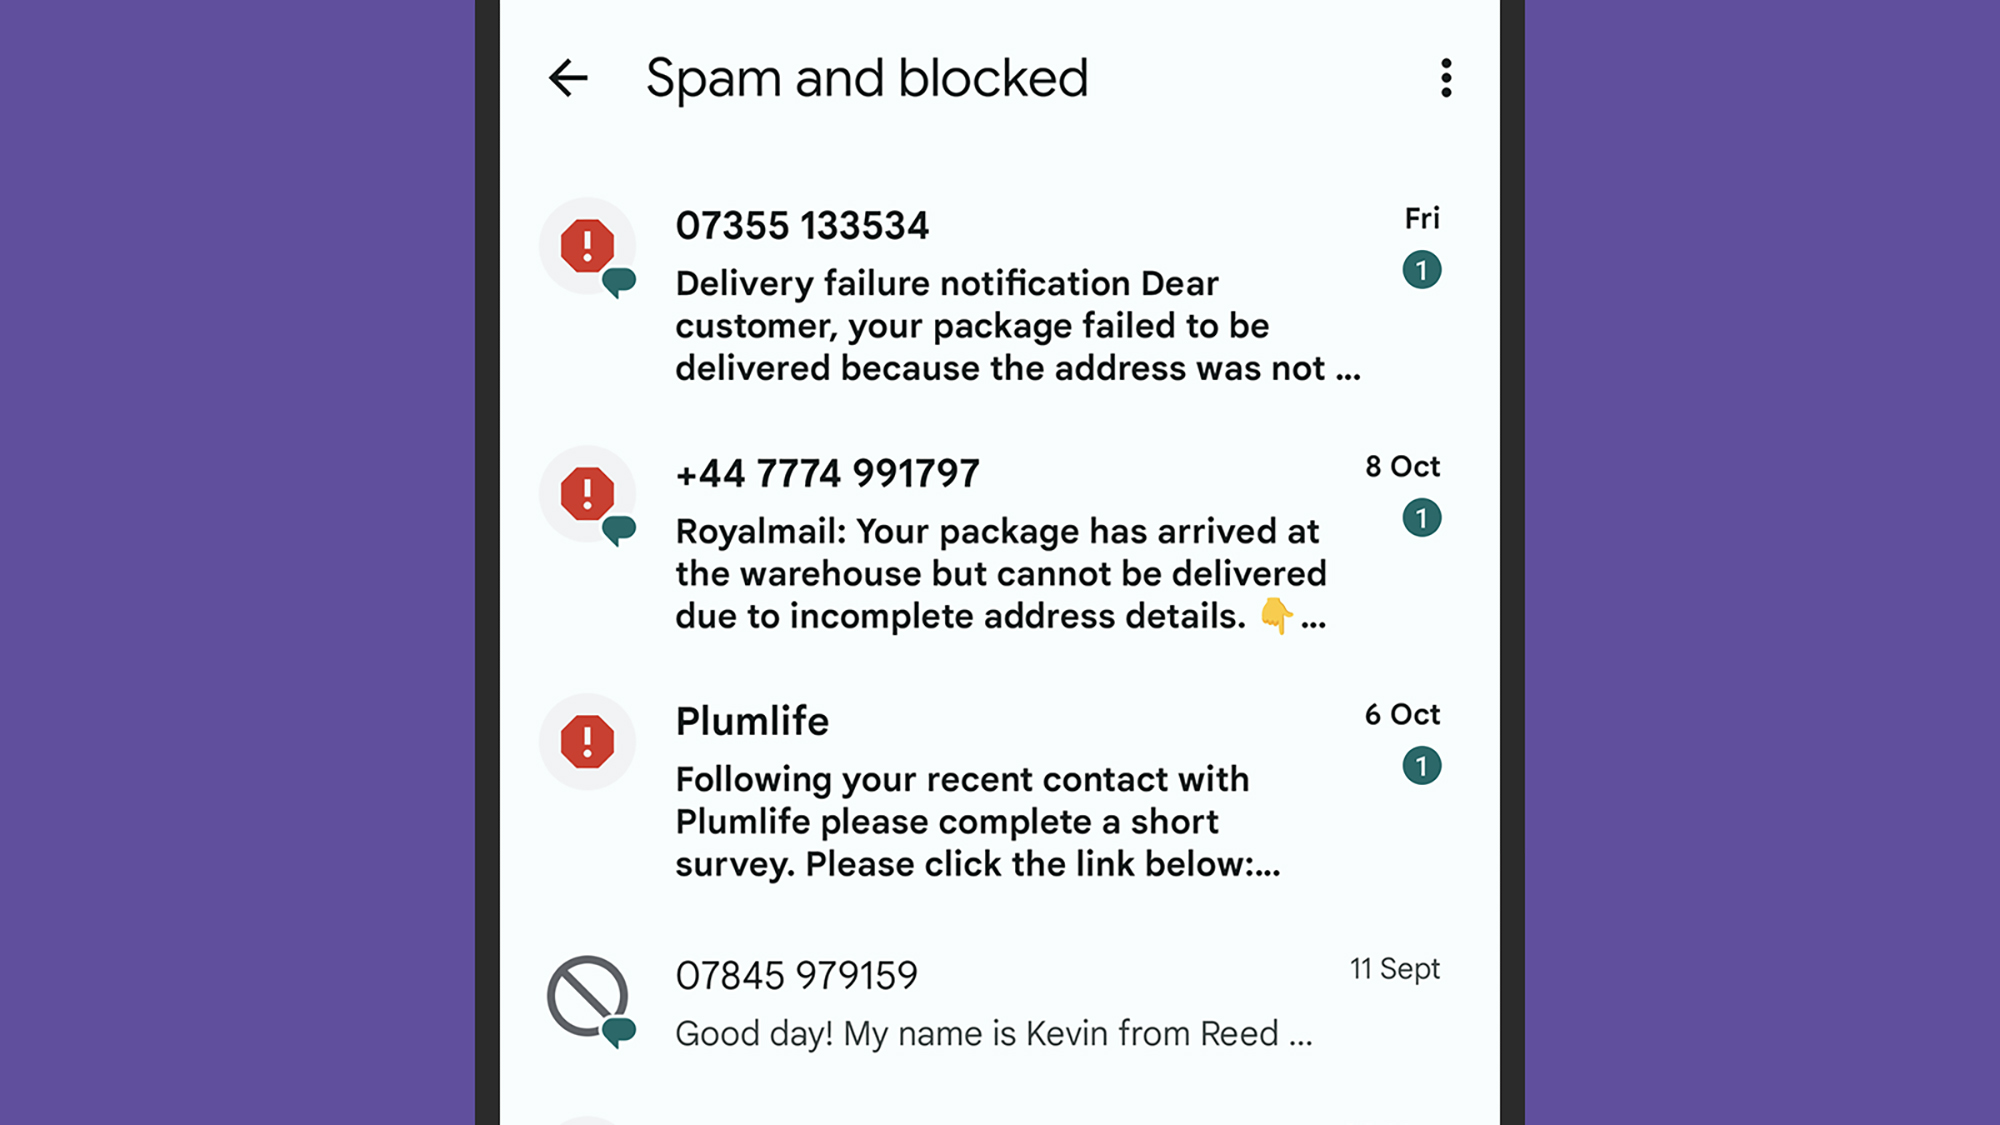 Google's Messages app showing the spam folder filled with unread spam texts